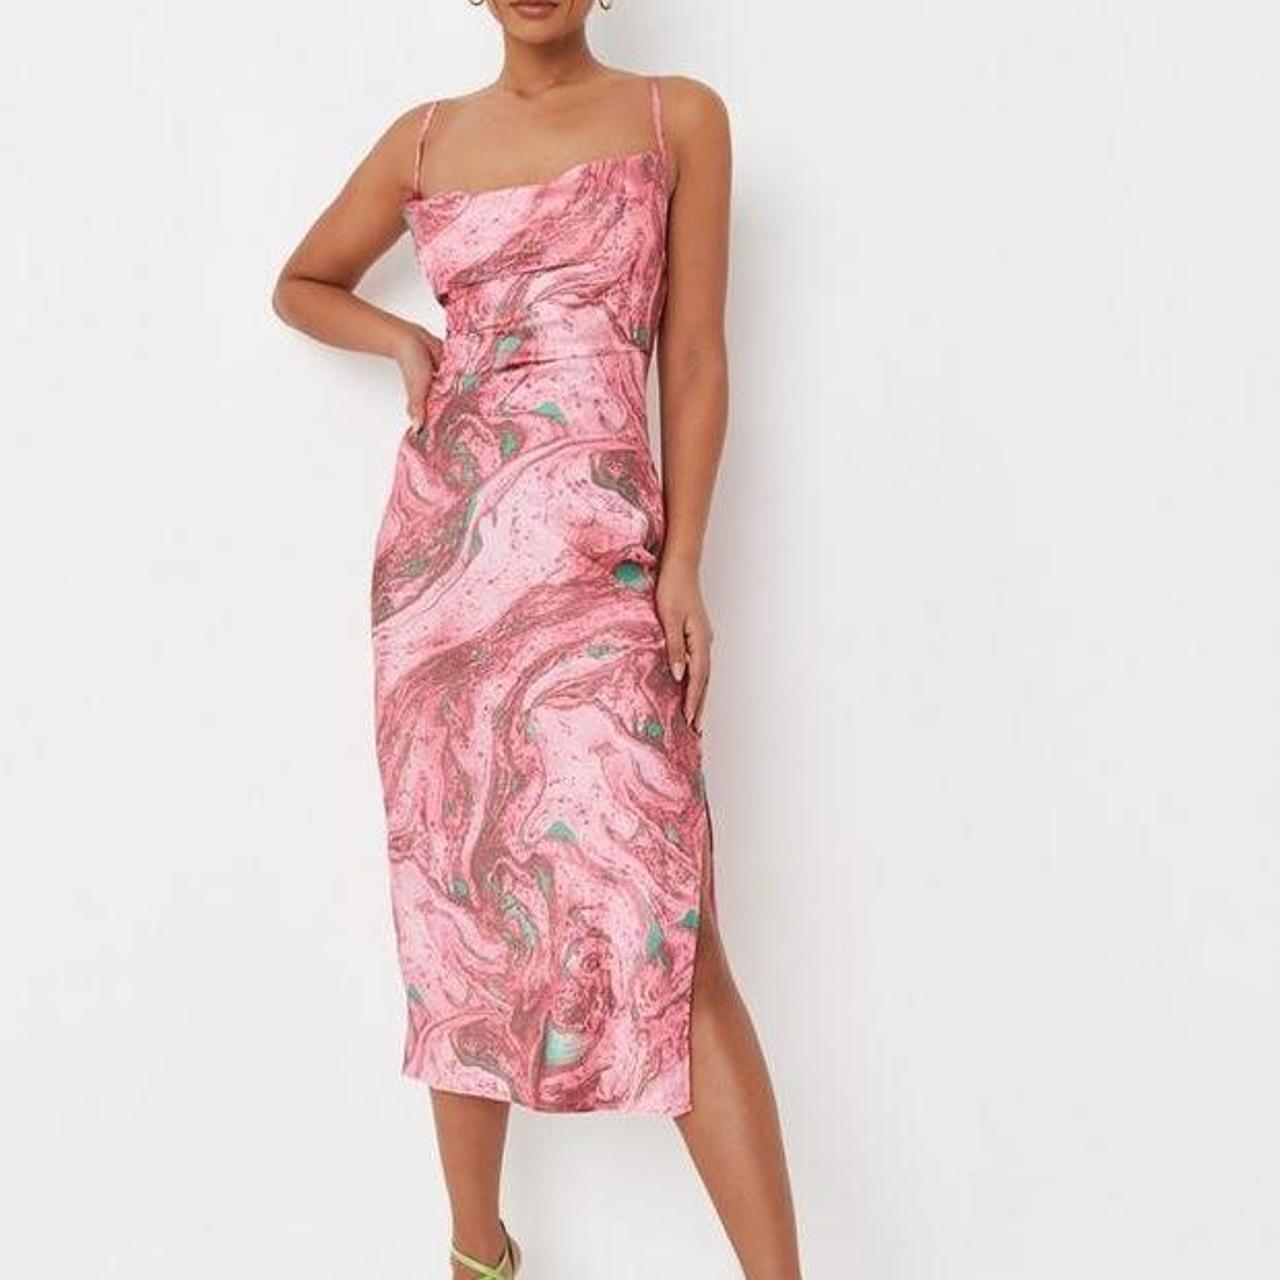 Missguided Women's Pink and Green Dress (3)